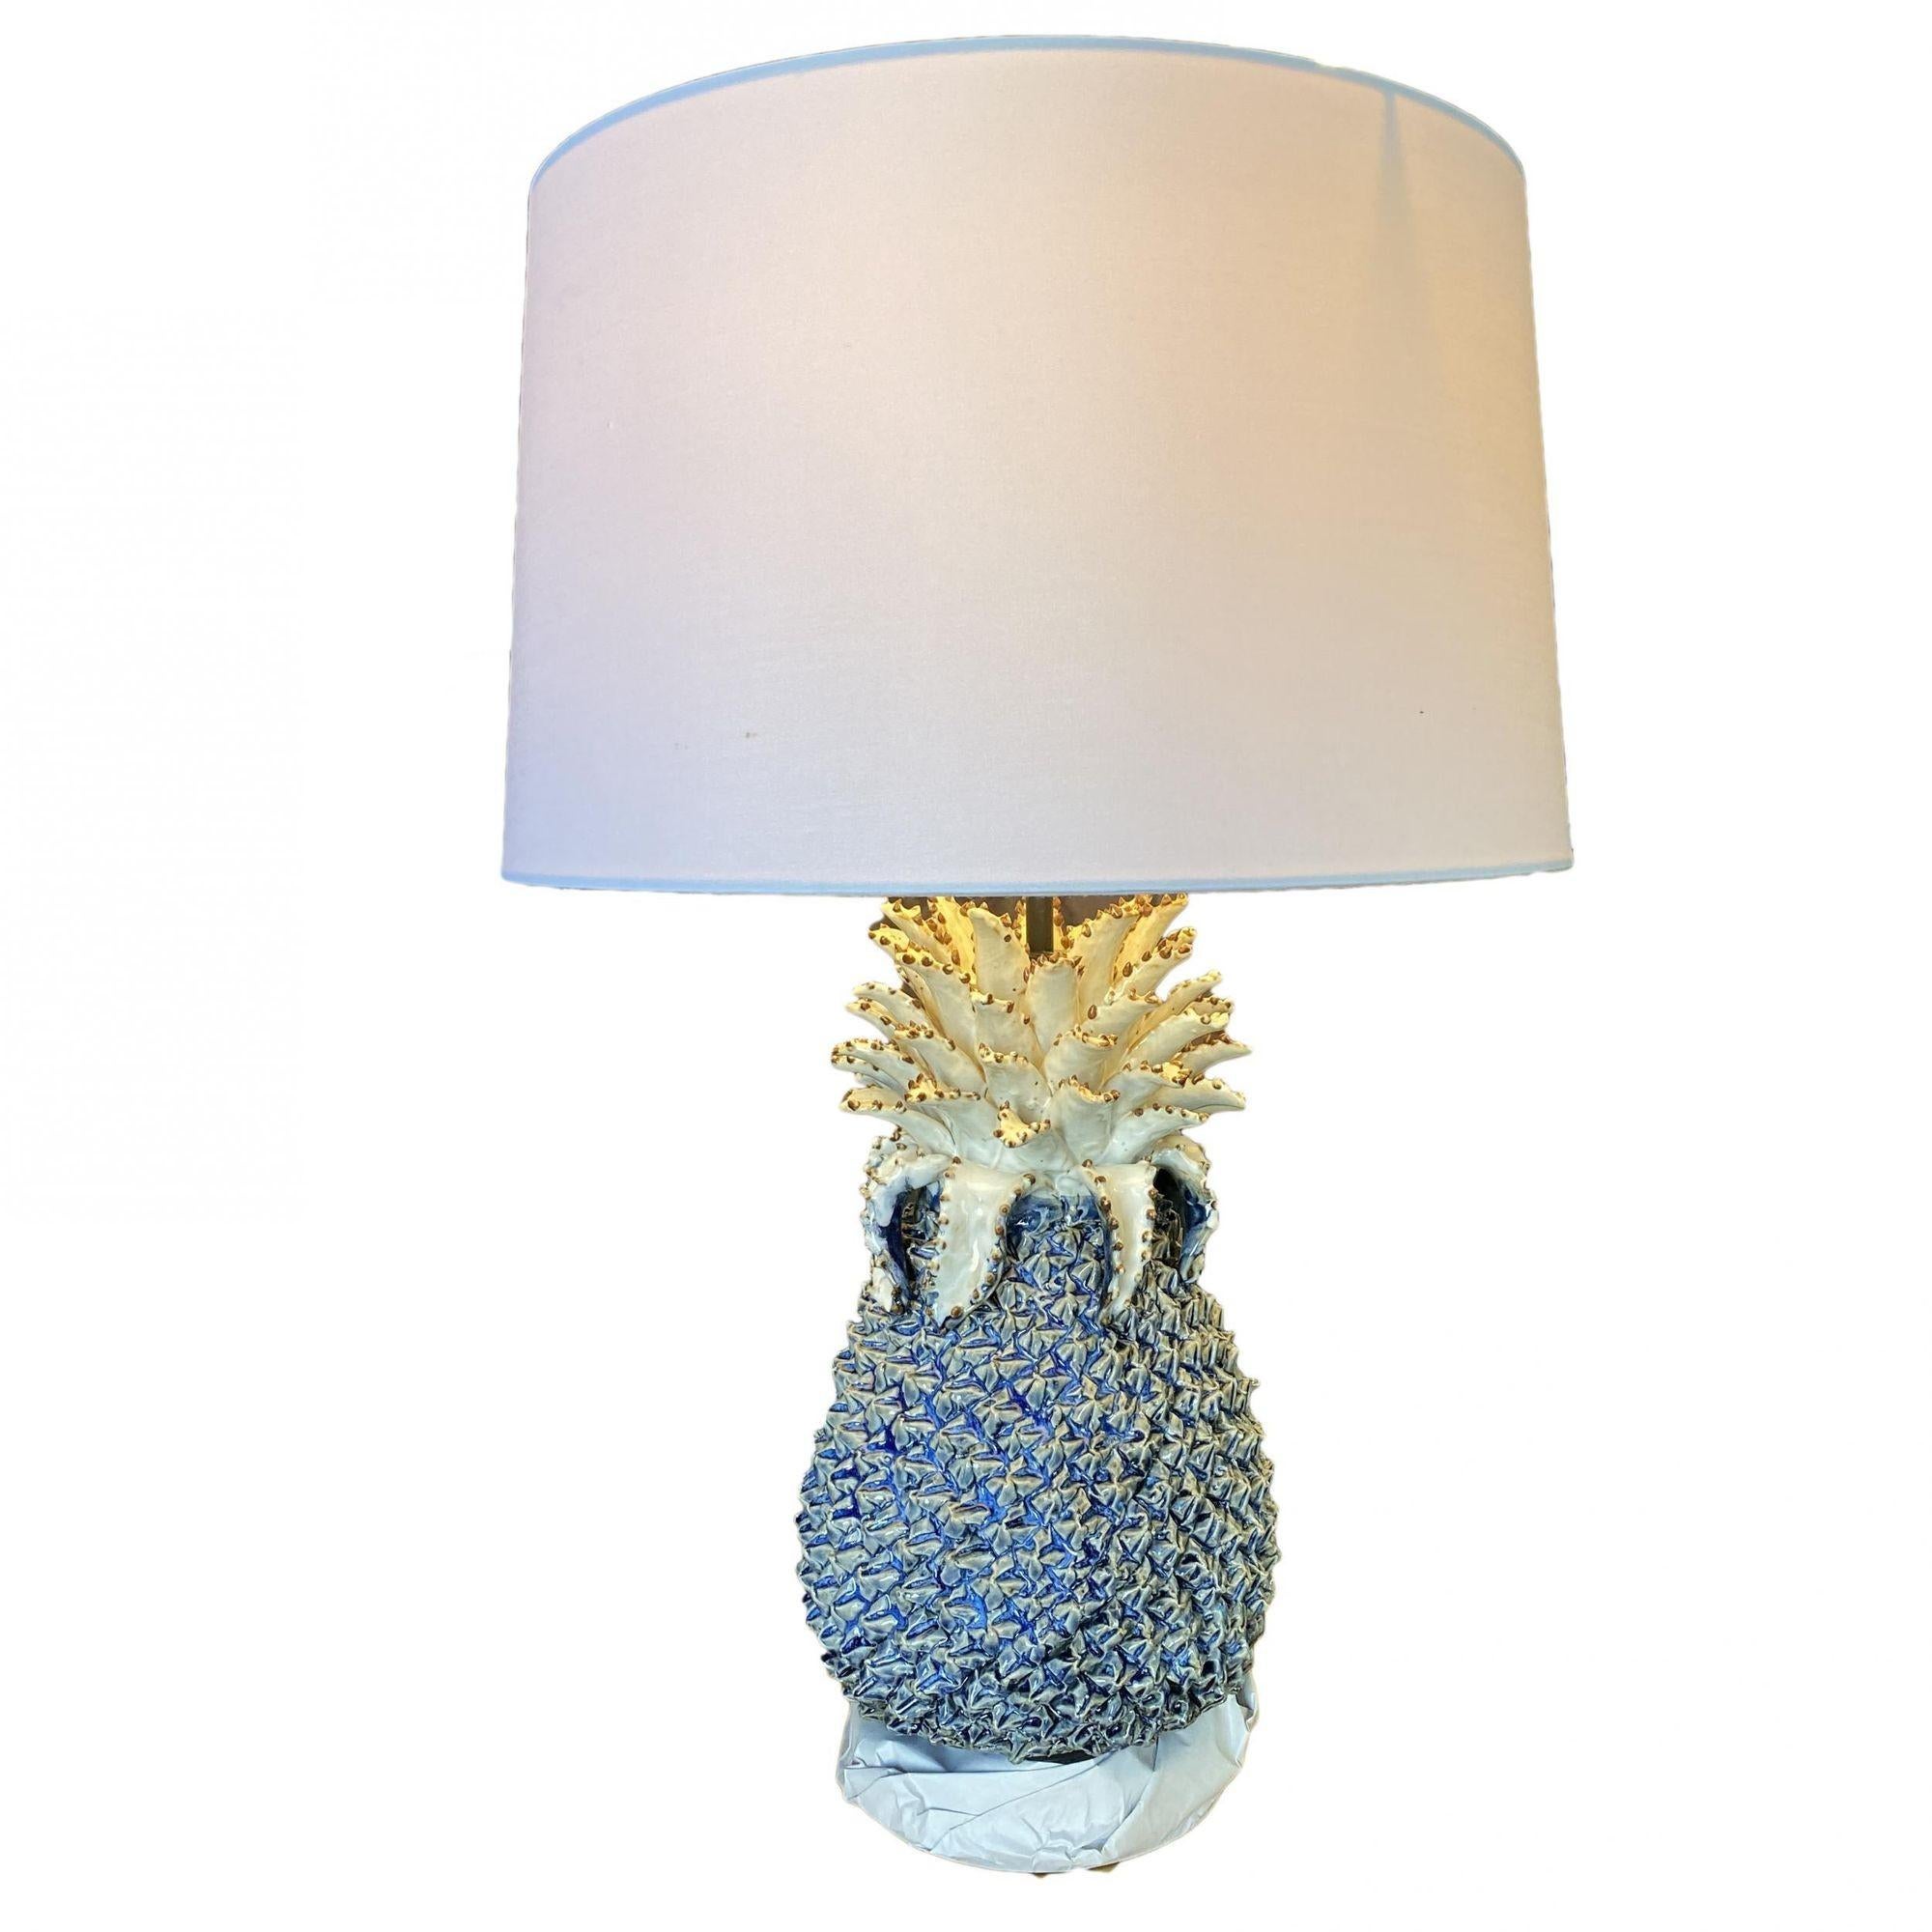 New hand painted ceramic pine apple lamp with large white shade and lucite base.

Lamp & Shade: 21.5